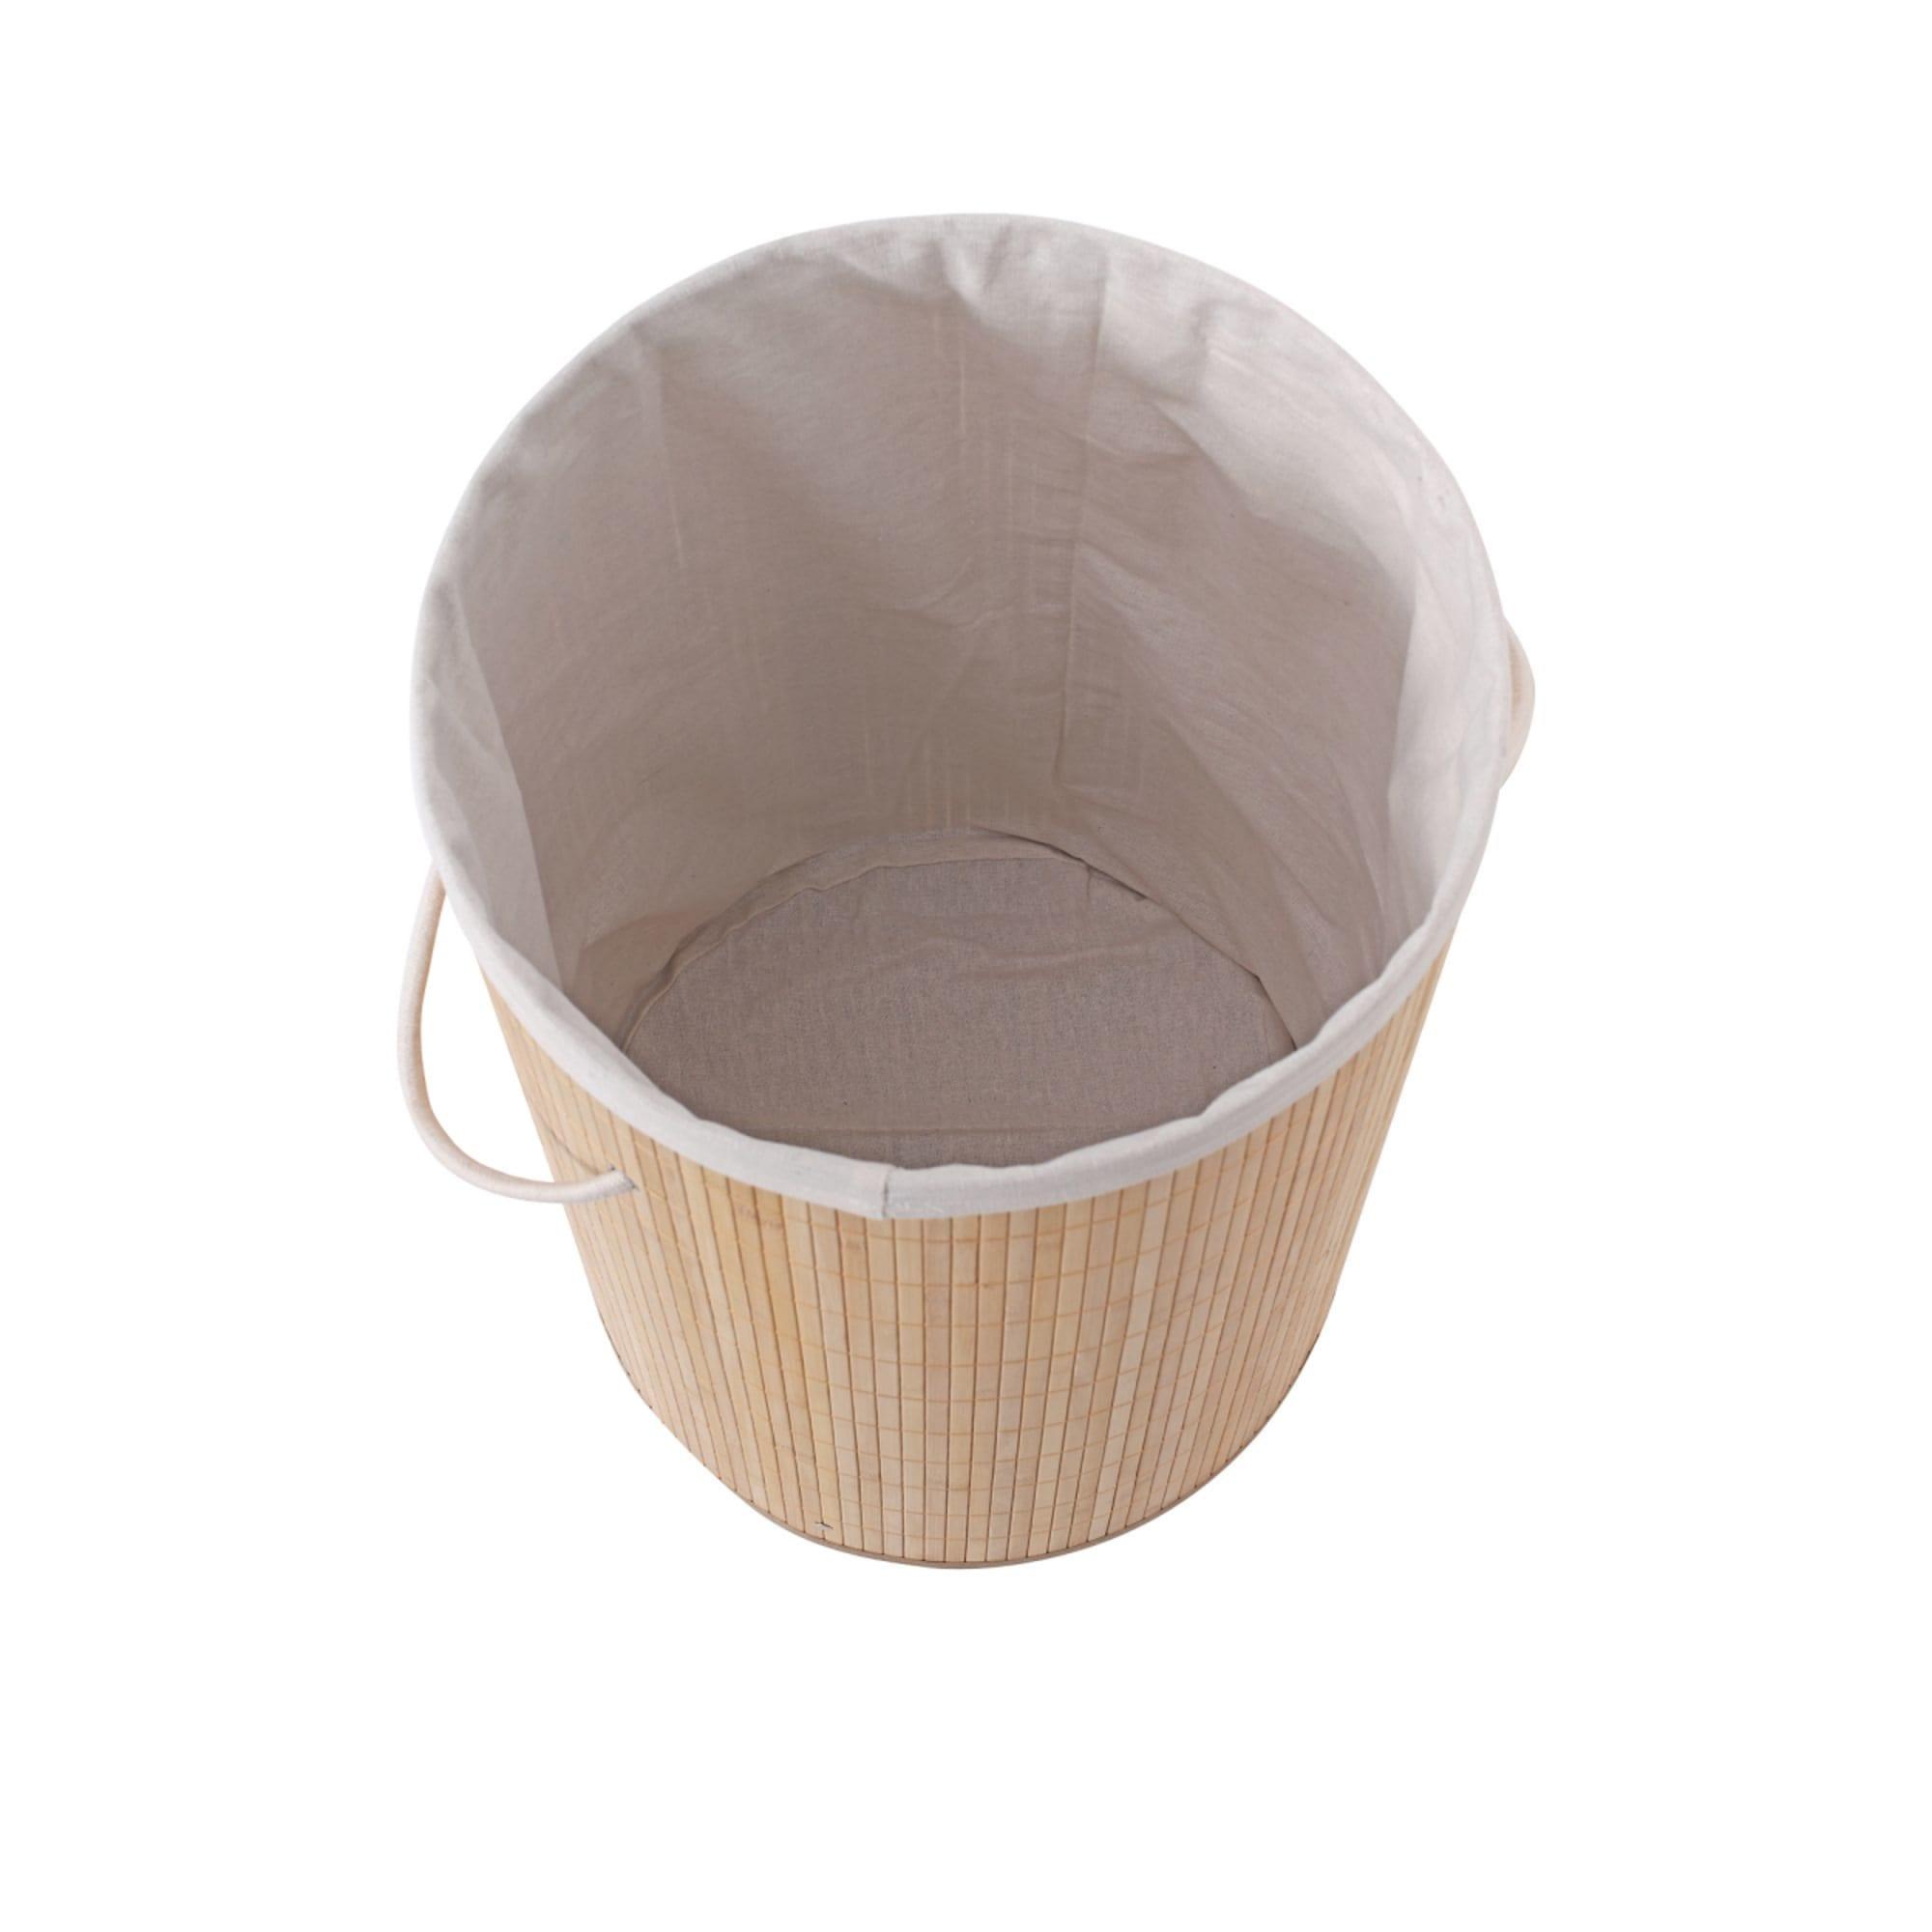 Sherwood Round Collapsible Bamboo Laundry Hamper with Polycotton Bag Image 4